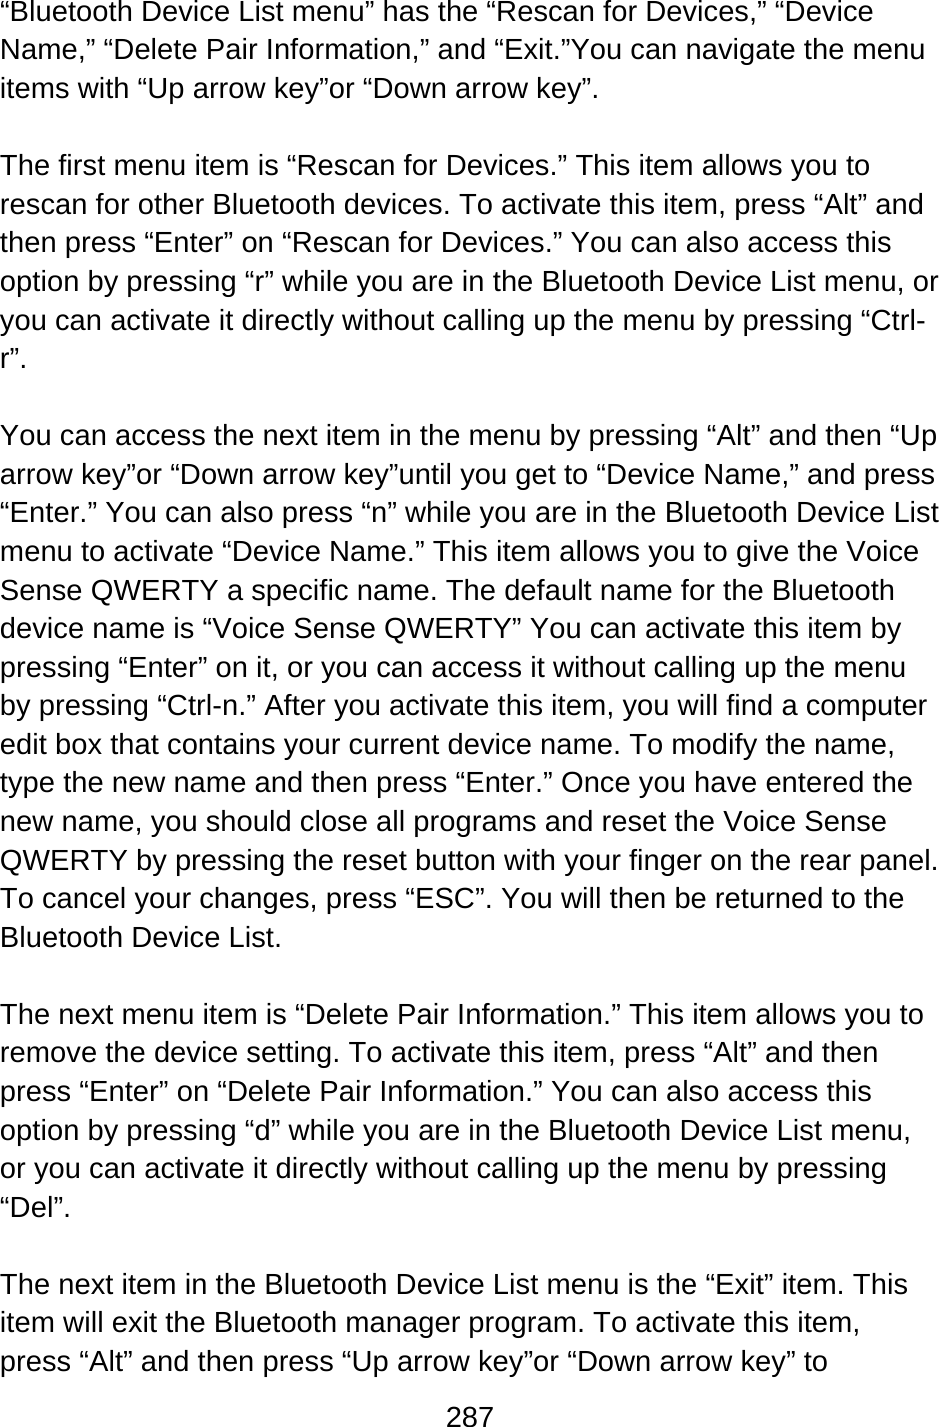 287  “Bluetooth Device List menu” has the “Rescan for Devices,” “Device Name,” “Delete Pair Information,” and “Exit.”You can navigate the menu items with “Up arrow key”or “Down arrow key”.  The first menu item is “Rescan for Devices.” This item allows you to rescan for other Bluetooth devices. To activate this item, press “Alt” and then press “Enter” on “Rescan for Devices.” You can also access this option by pressing “r” while you are in the Bluetooth Device List menu, or you can activate it directly without calling up the menu by pressing “Ctrl-r”.  You can access the next item in the menu by pressing “Alt” and then “Up arrow key”or “Down arrow key”until you get to “Device Name,” and press “Enter.” You can also press “n” while you are in the Bluetooth Device List menu to activate “Device Name.” This item allows you to give the Voice Sense QWERTY a specific name. The default name for the Bluetooth device name is “Voice Sense QWERTY” You can activate this item by pressing “Enter” on it, or you can access it without calling up the menu by pressing “Ctrl-n.” After you activate this item, you will find a computer edit box that contains your current device name. To modify the name, type the new name and then press “Enter.” Once you have entered the new name, you should close all programs and reset the Voice Sense QWERTY by pressing the reset button with your finger on the rear panel. To cancel your changes, press “ESC”. You will then be returned to the Bluetooth Device List.  The next menu item is “Delete Pair Information.” This item allows you to remove the device setting. To activate this item, press “Alt” and then press “Enter” on “Delete Pair Information.” You can also access this option by pressing “d” while you are in the Bluetooth Device List menu, or you can activate it directly without calling up the menu by pressing “Del”.  The next item in the Bluetooth Device List menu is the “Exit” item. This item will exit the Bluetooth manager program. To activate this item, press “Alt” and then press “Up arrow key”or “Down arrow key” to 